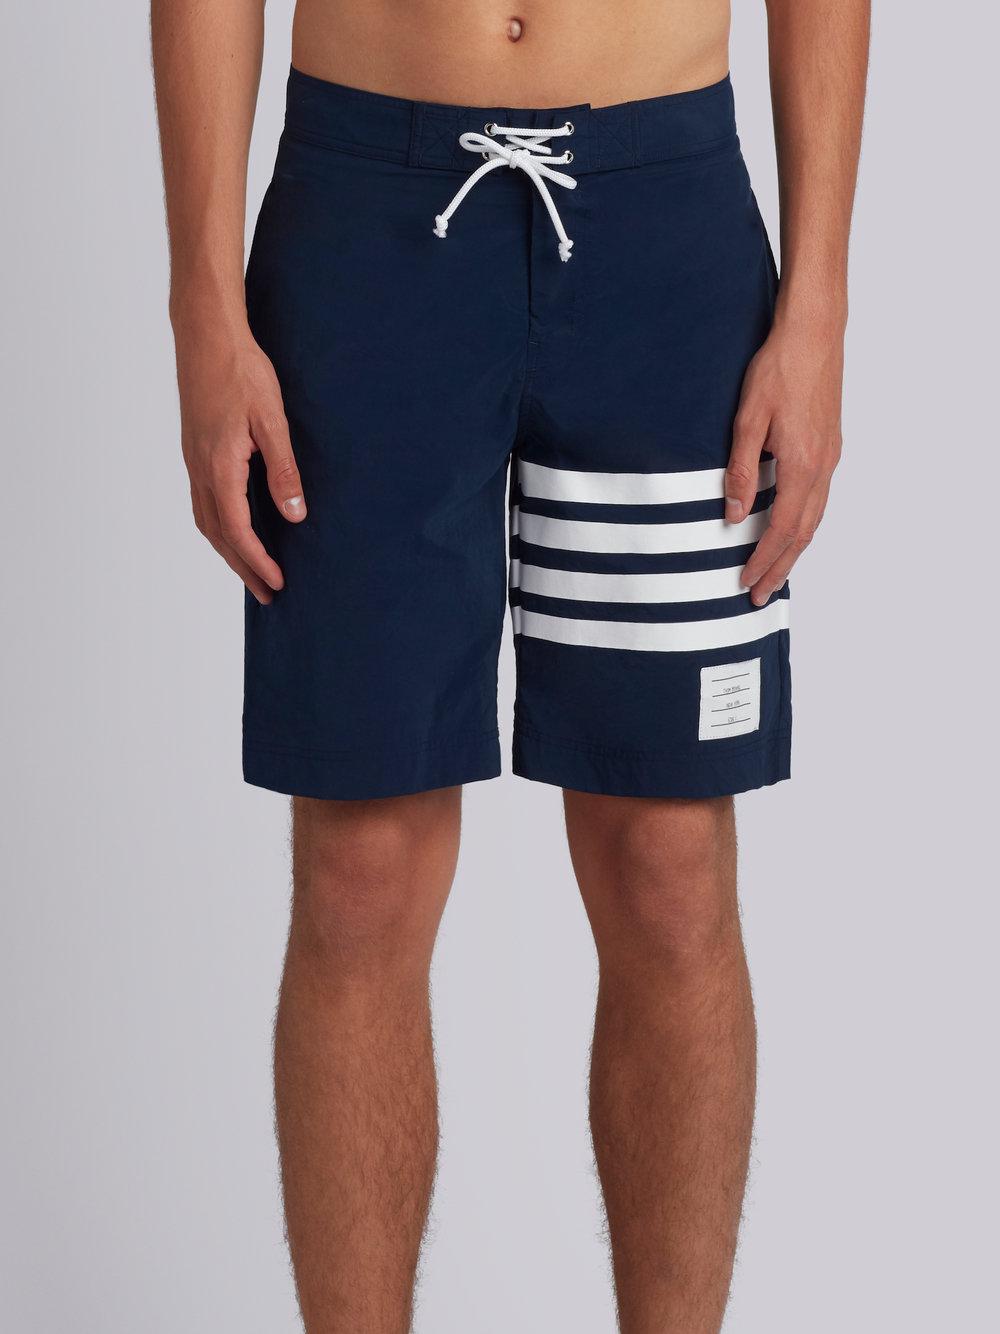 Lyst - Thom browne Classic Board Short With 4-bar University Stripes in